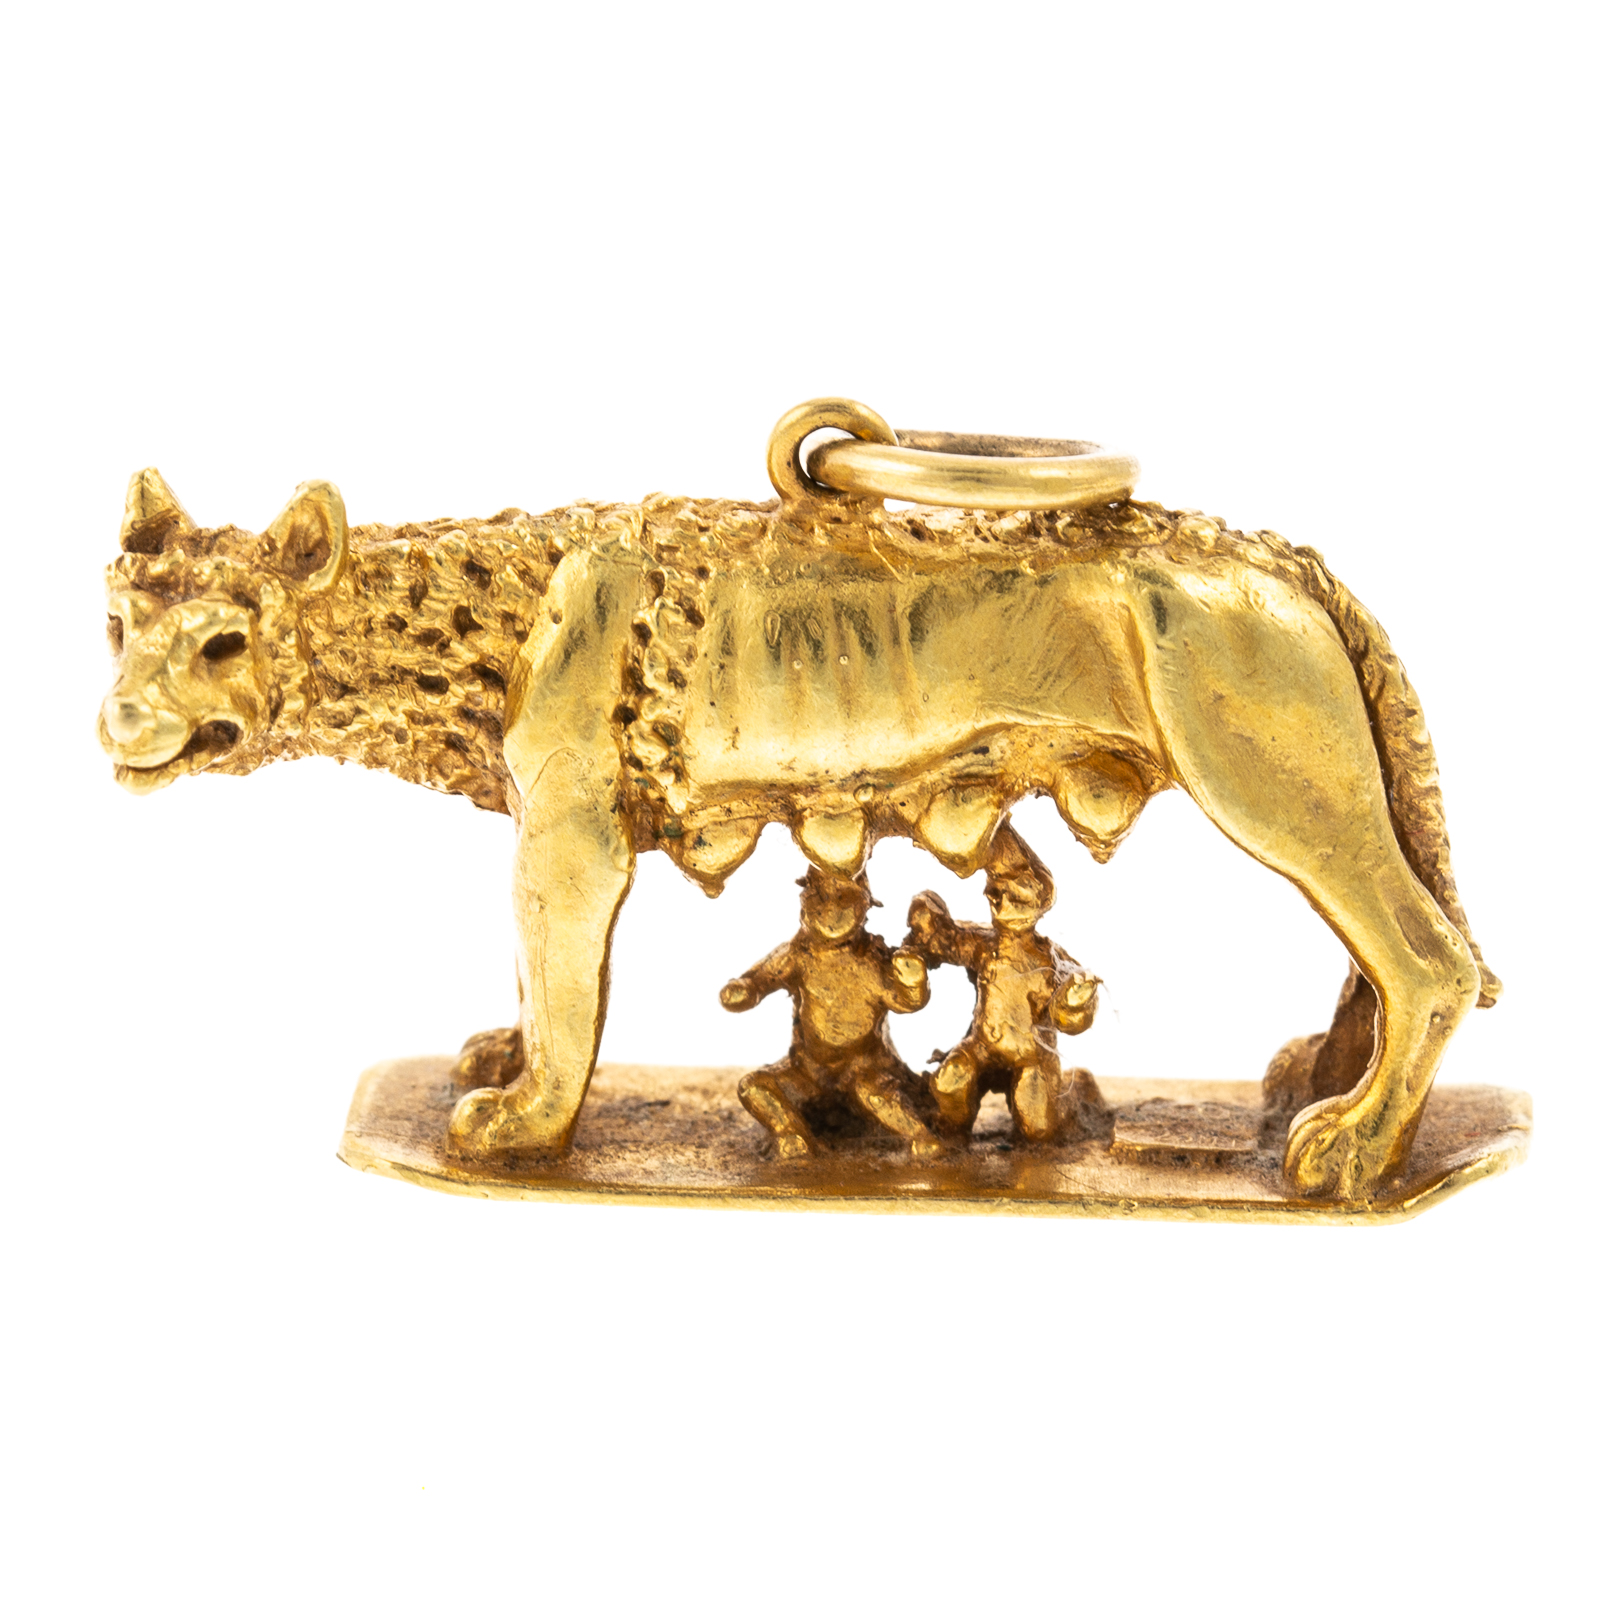 A SOLID 18K YELLOW GOLD ROMULUS & REMUS